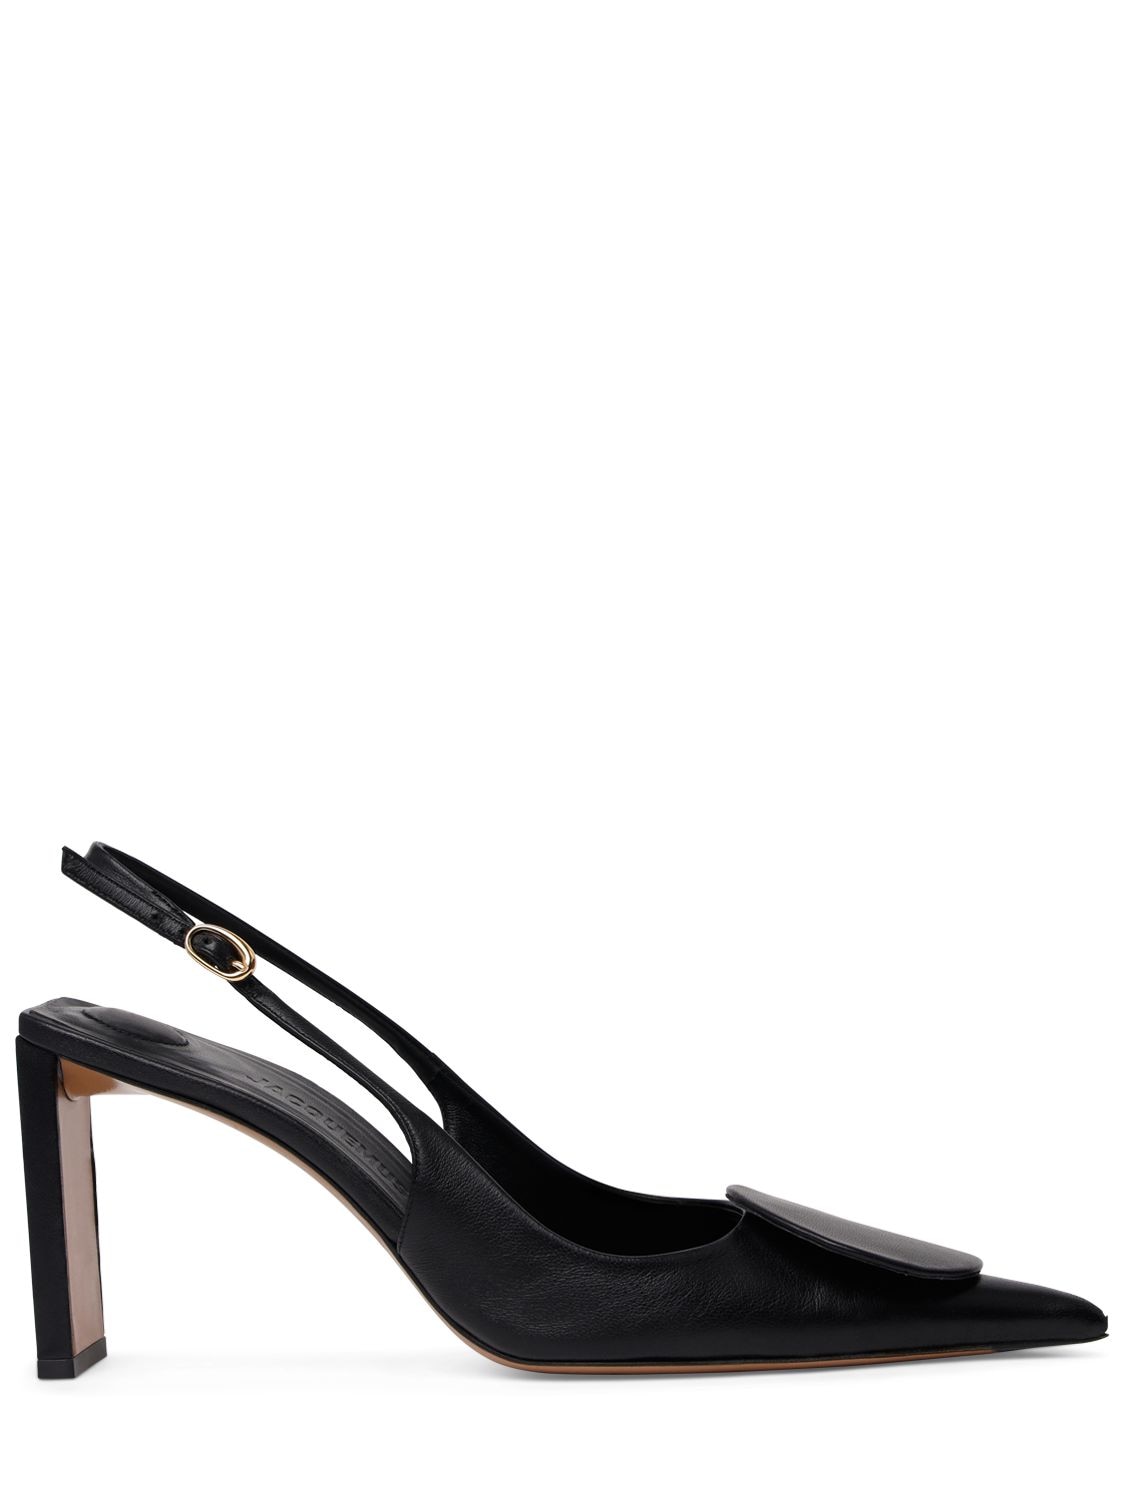 Jacquemus 80mm Duelo Haut Leather Slingback Heels In Black